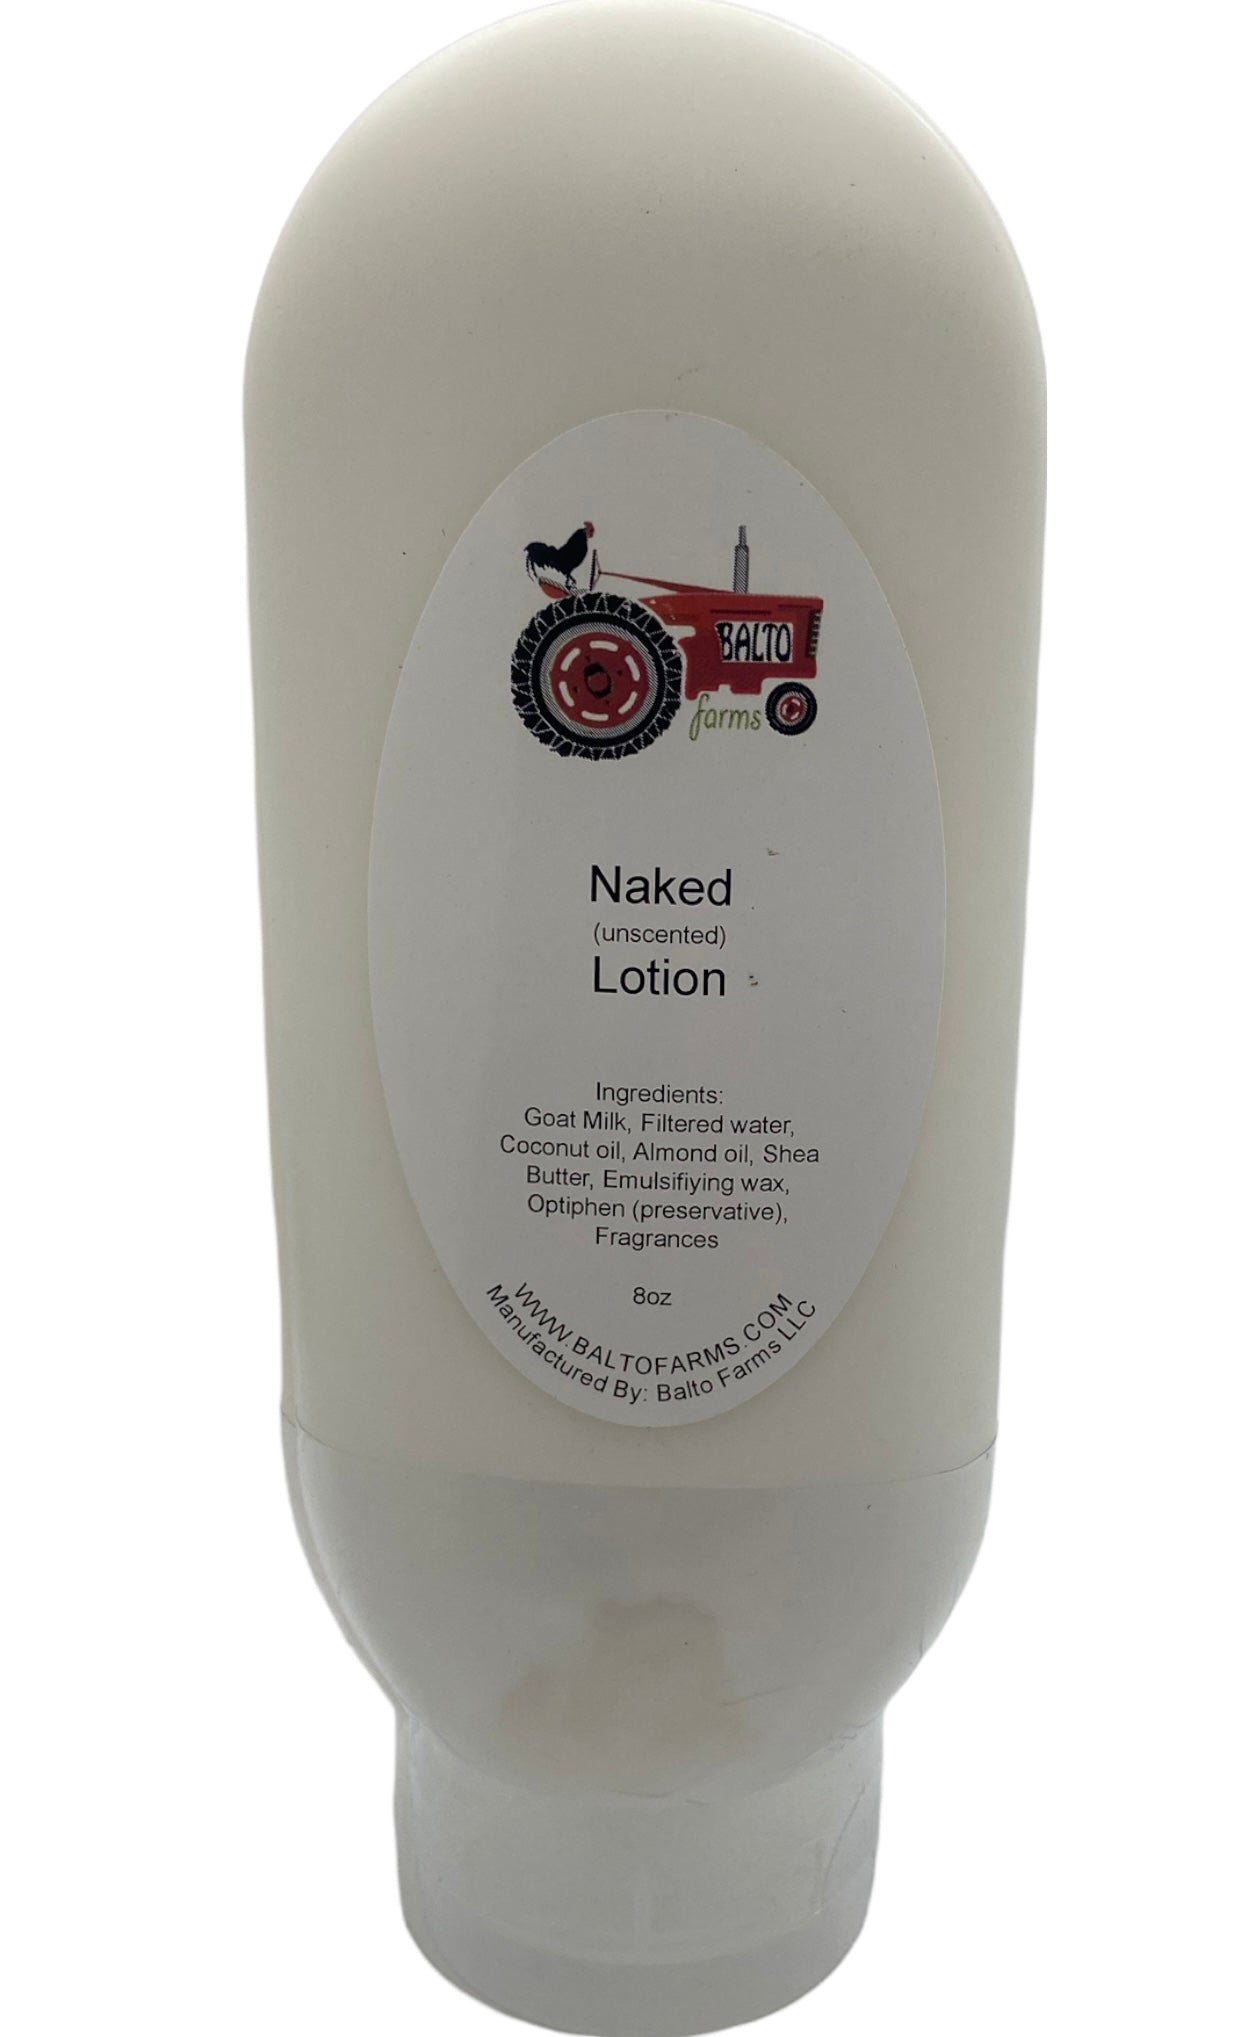 Naked unscented Lotion